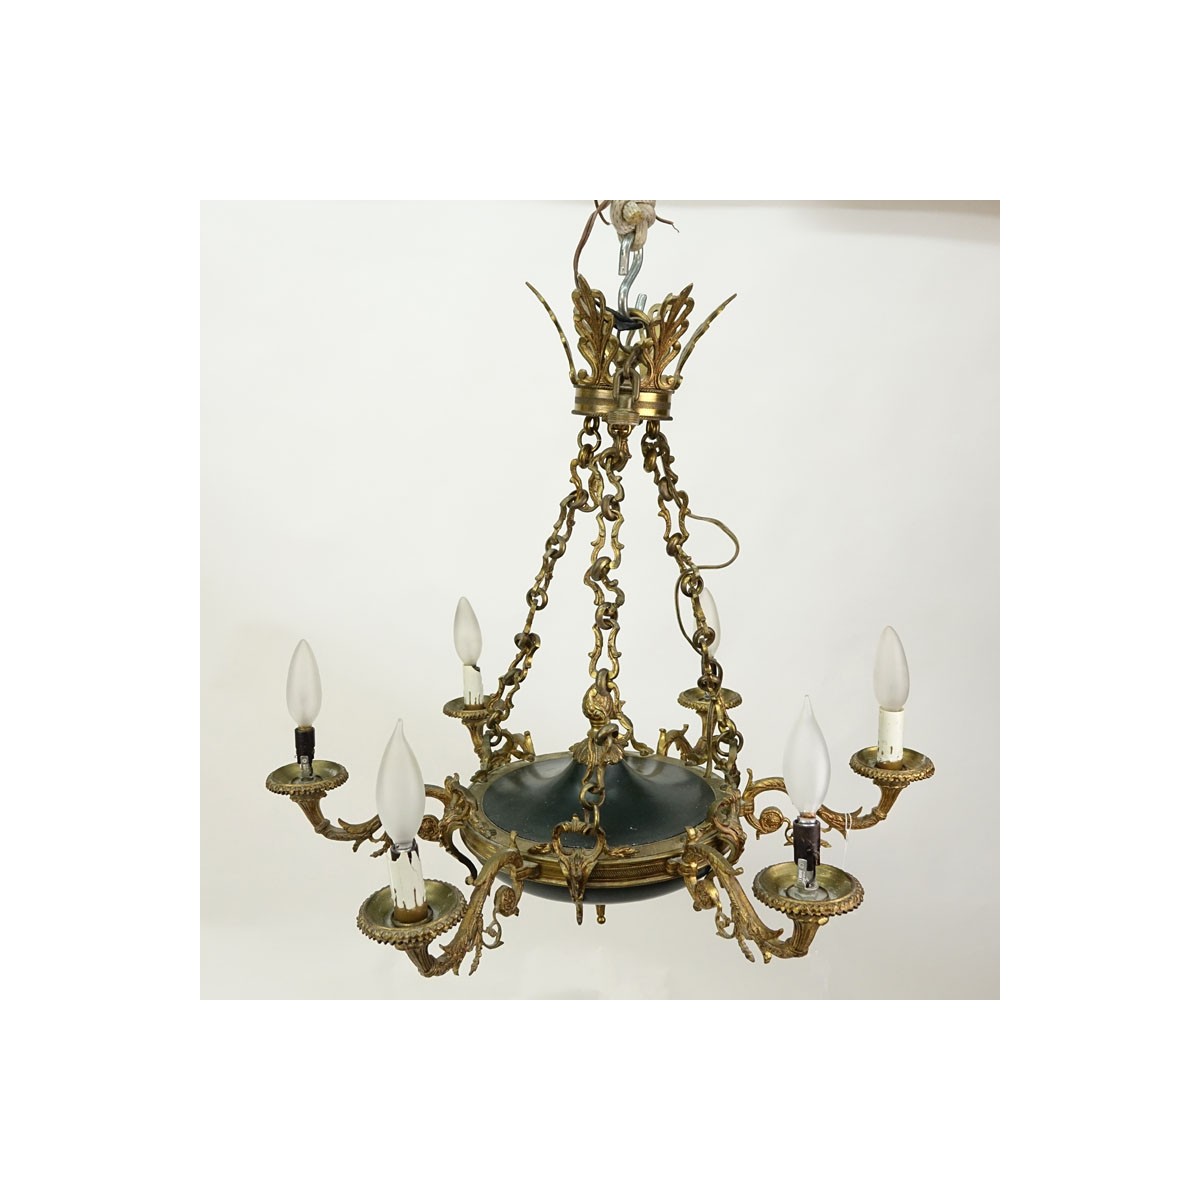 19/20th Century Empire Style Six-Light Gilt Brass and Tole Chandelier.  Rubbing to gilt, losses to 